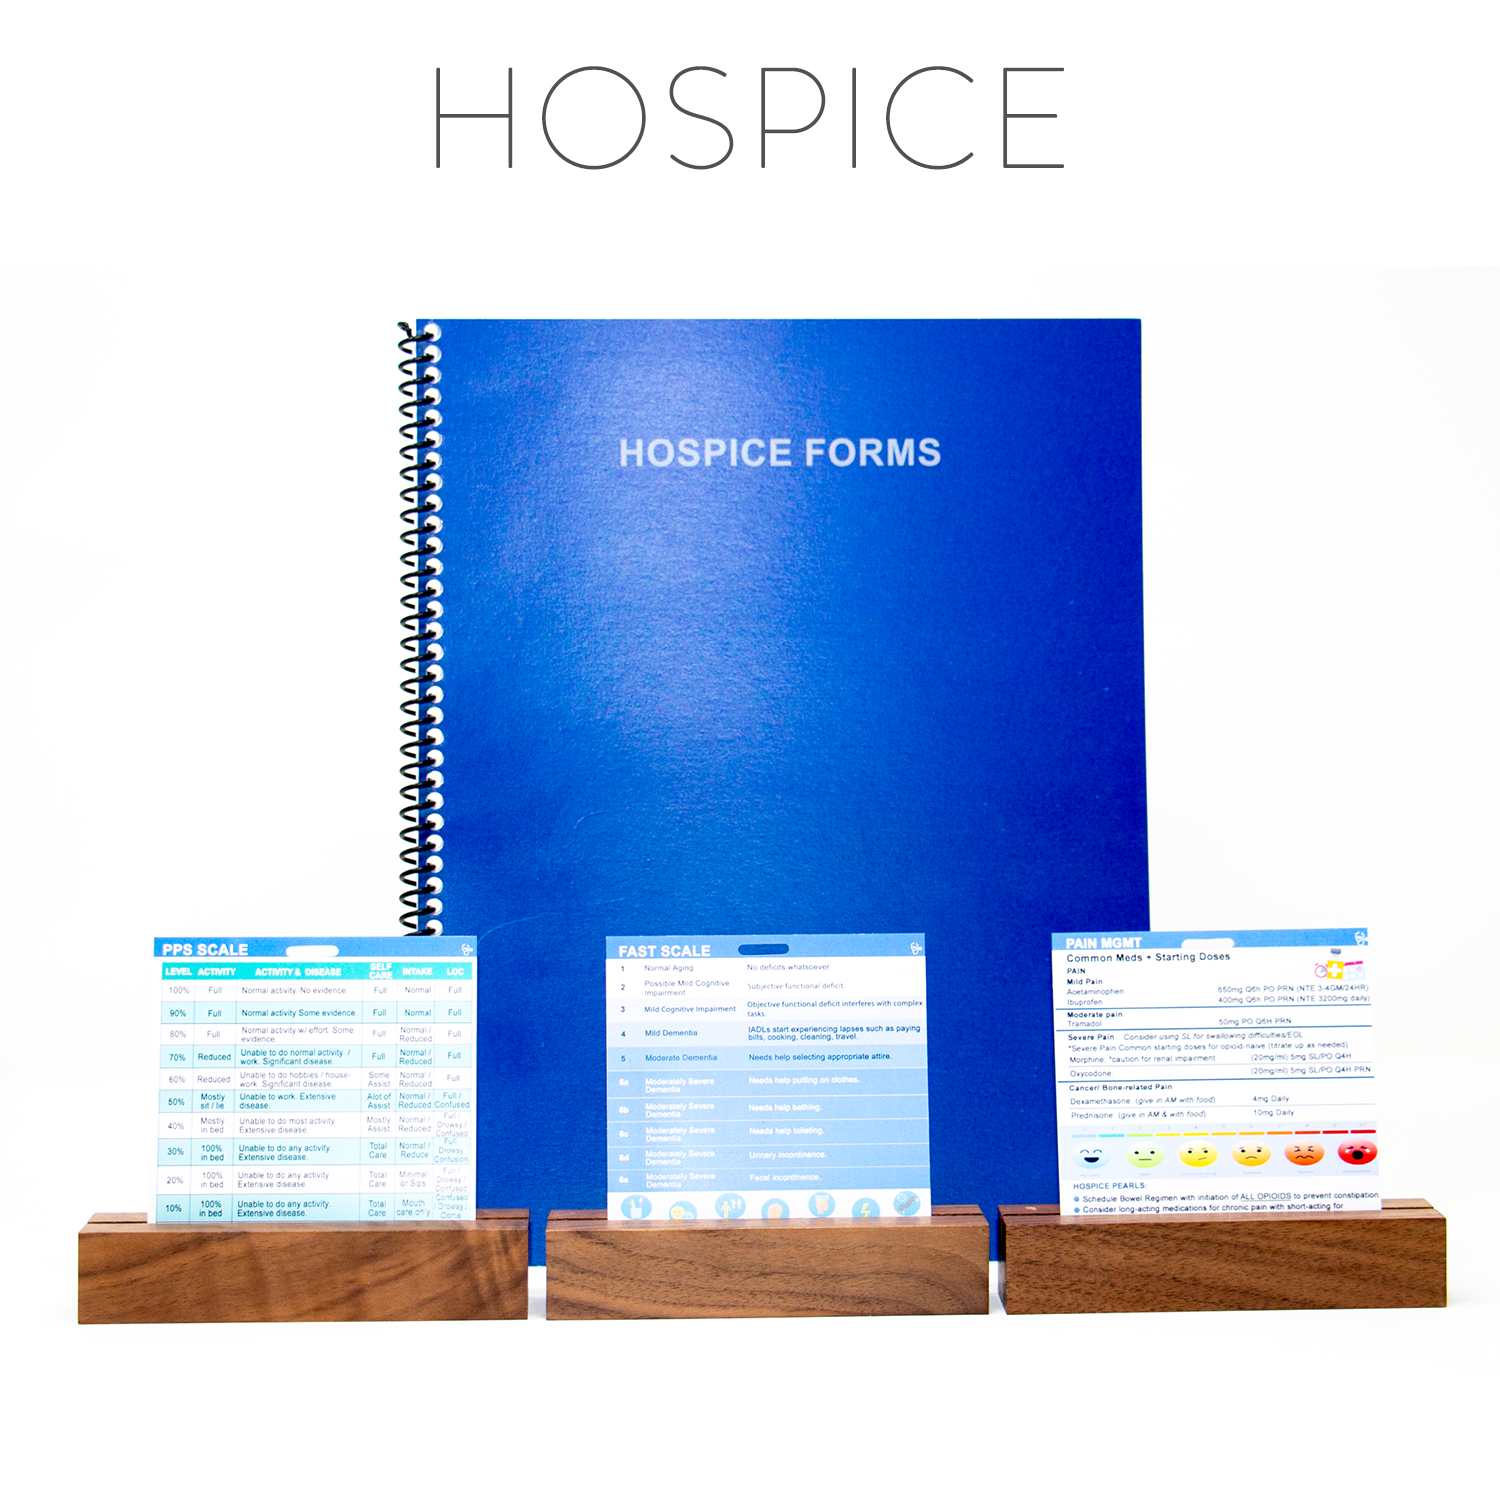 Our Ultimate Hospice collection with forms, badges and everything you need to get started in Hospice.